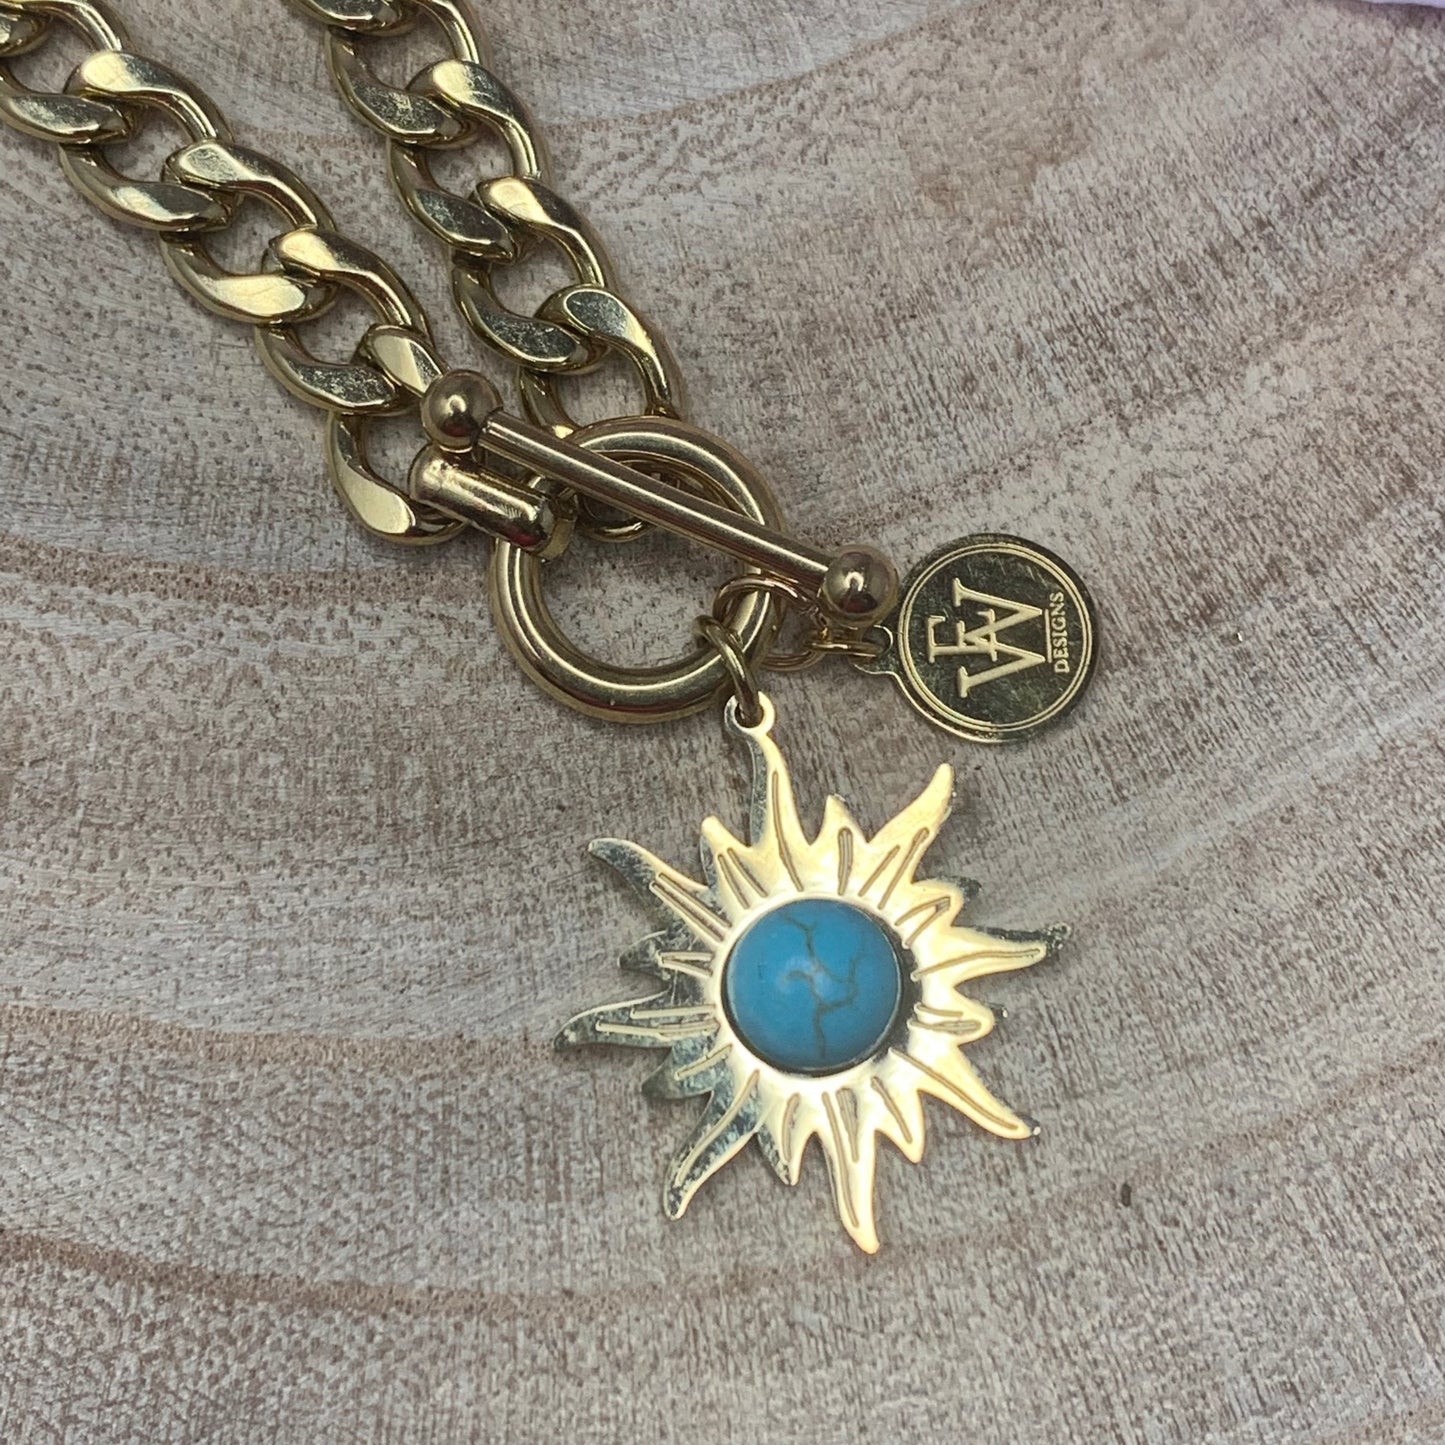 Stainless Chain Linxs with a Sun Shape Pendant and a gemstone in it